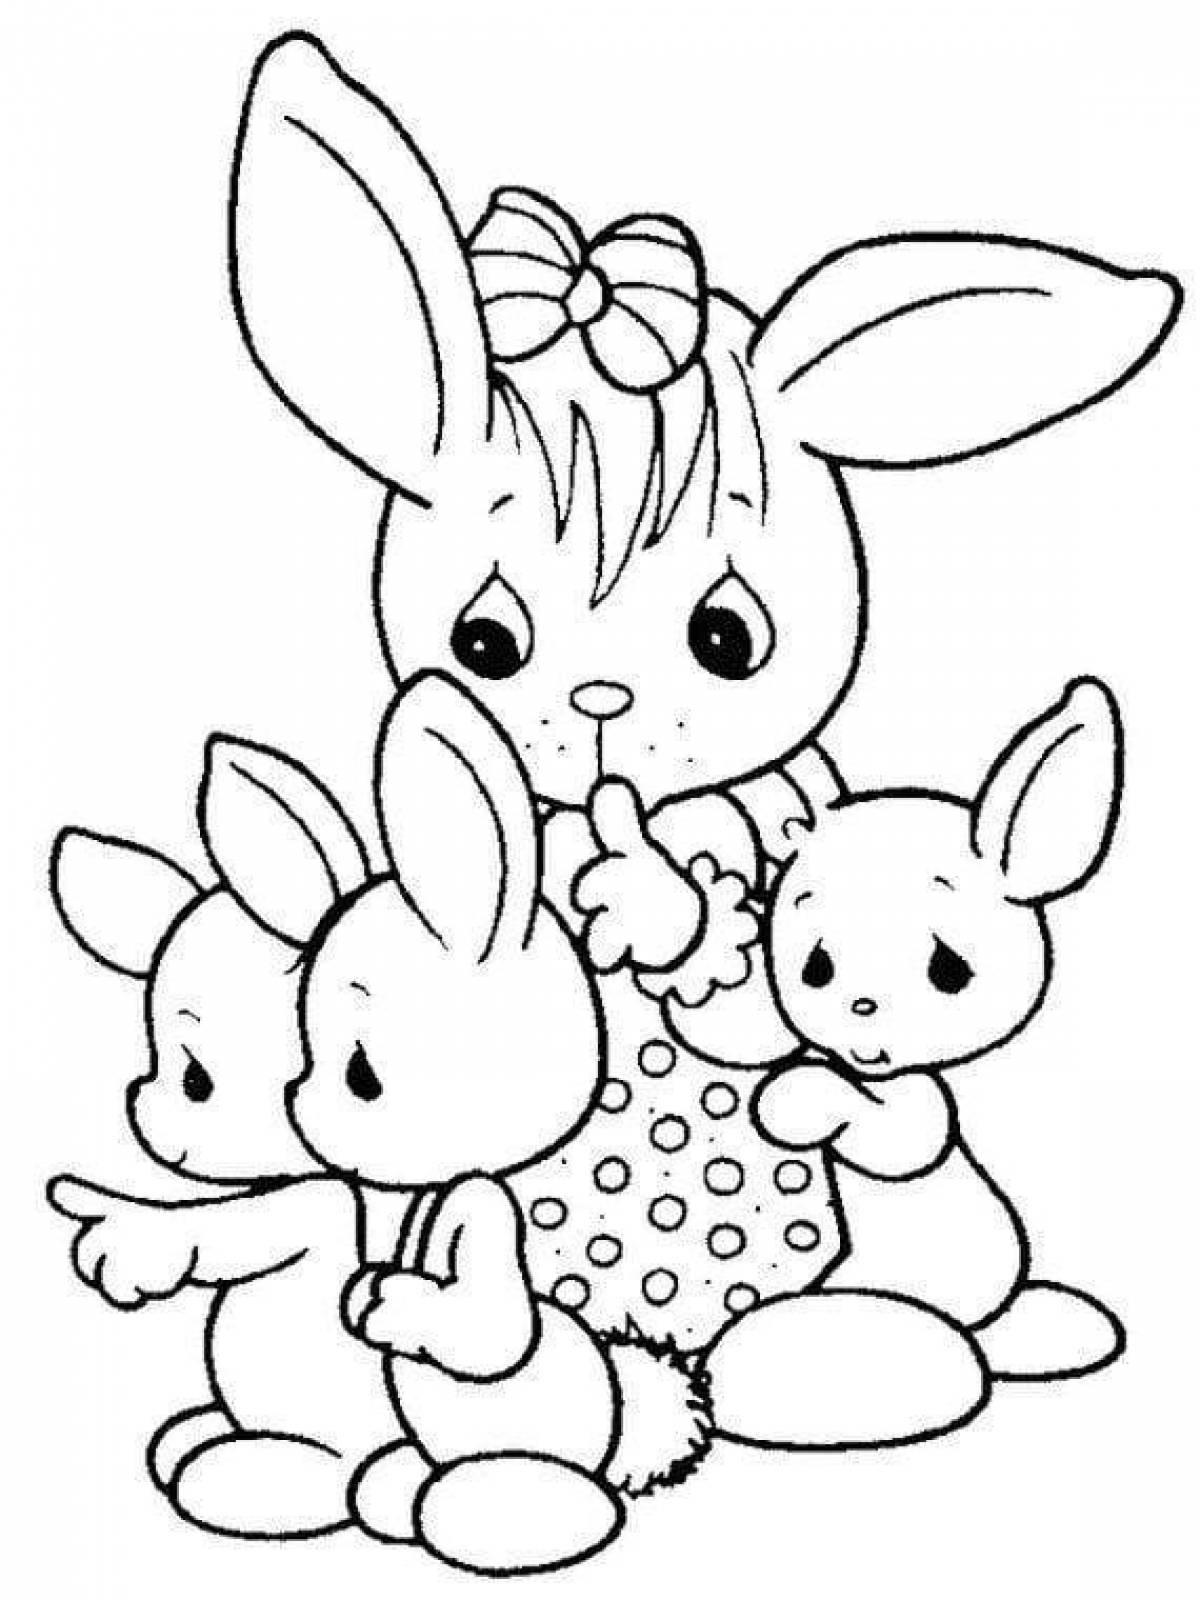 Coloring book busy little rabbit